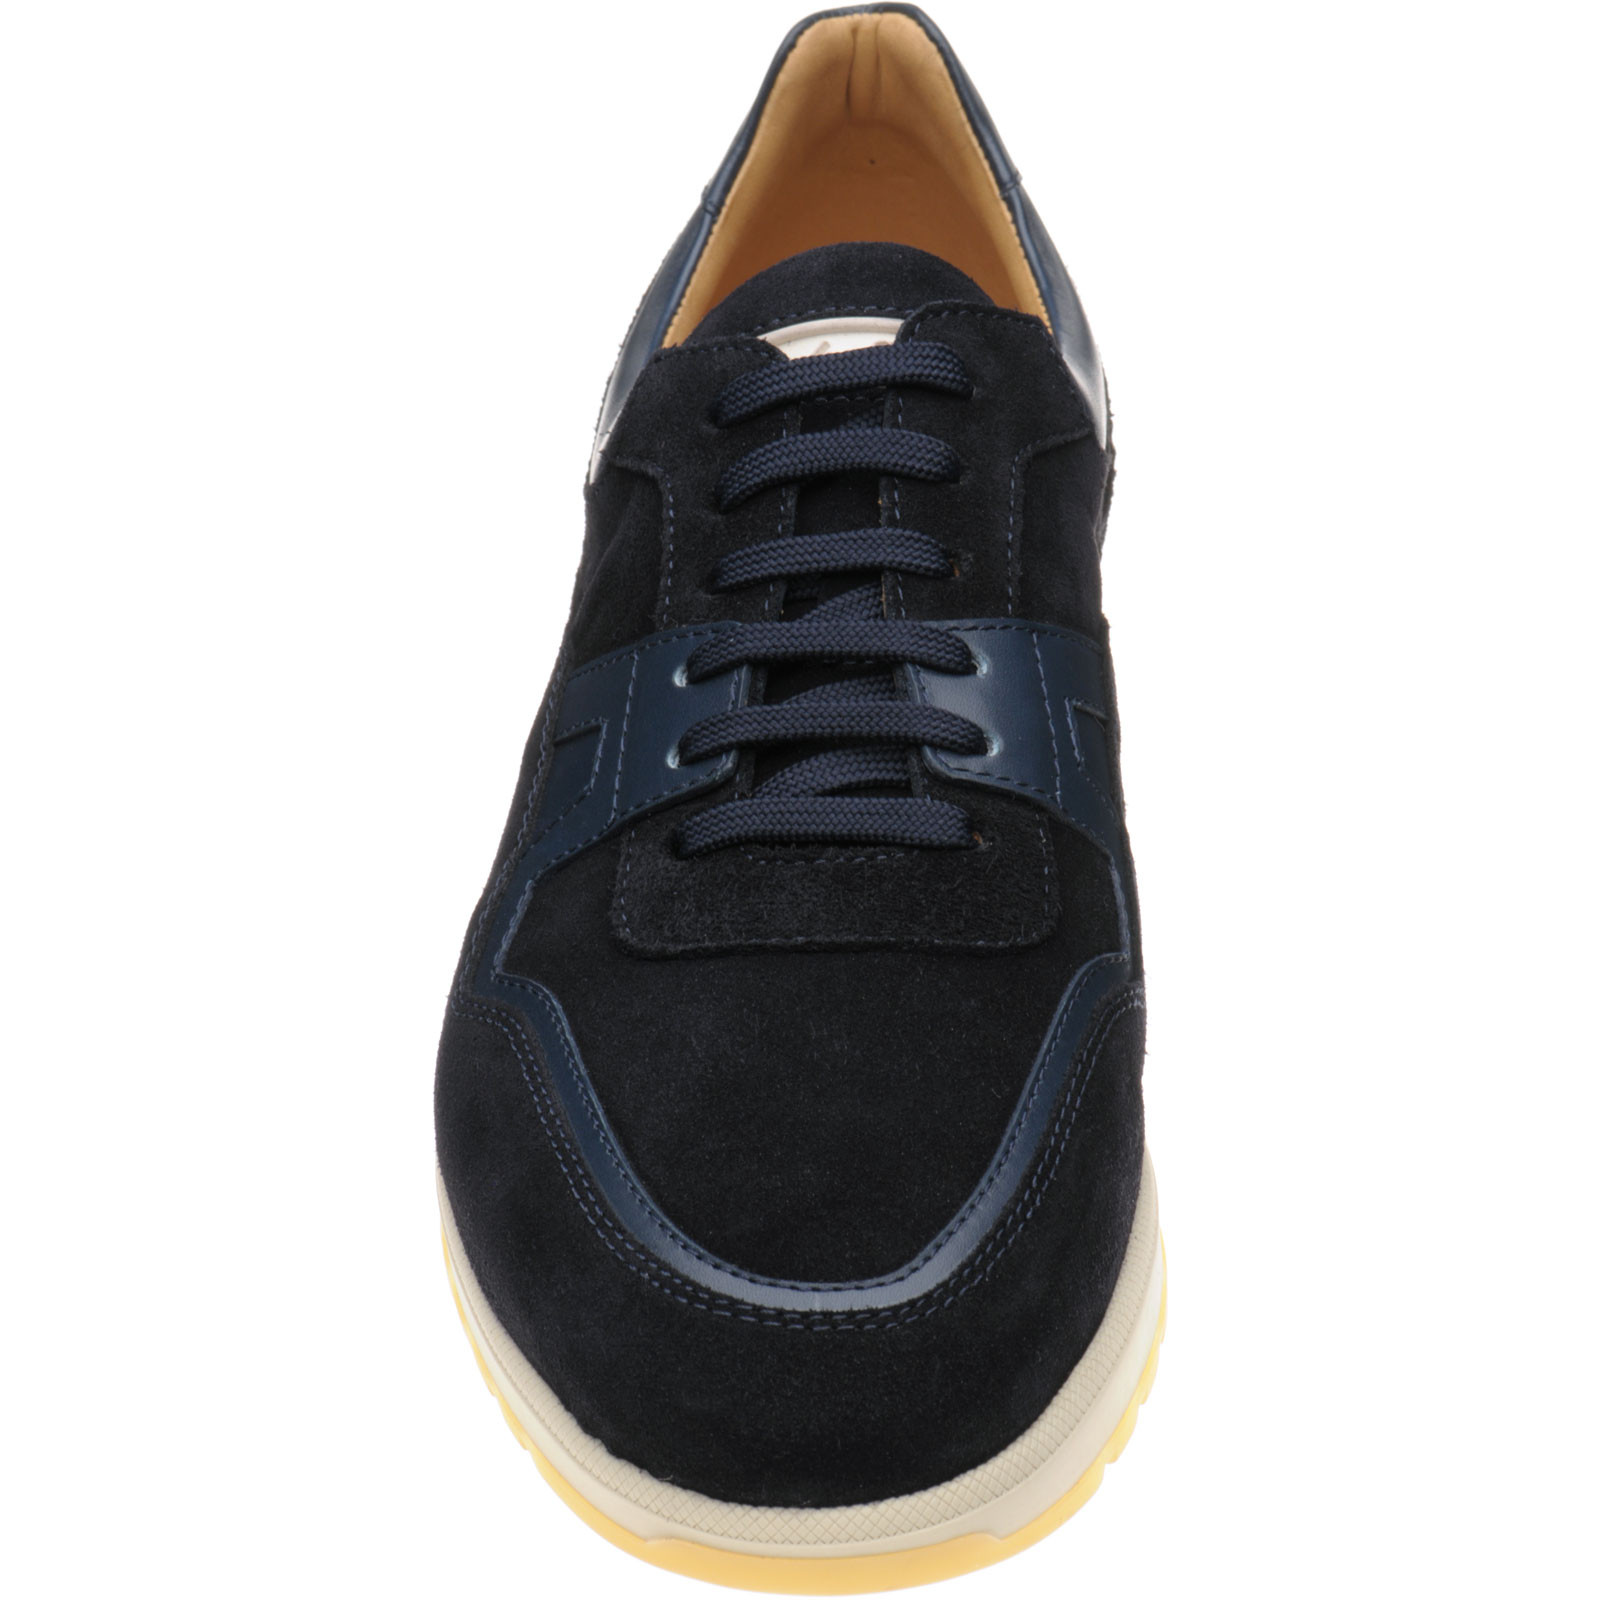 Herring shoes | Herring Classic | Dunsfold in Navy Calf and Navy Suede ...